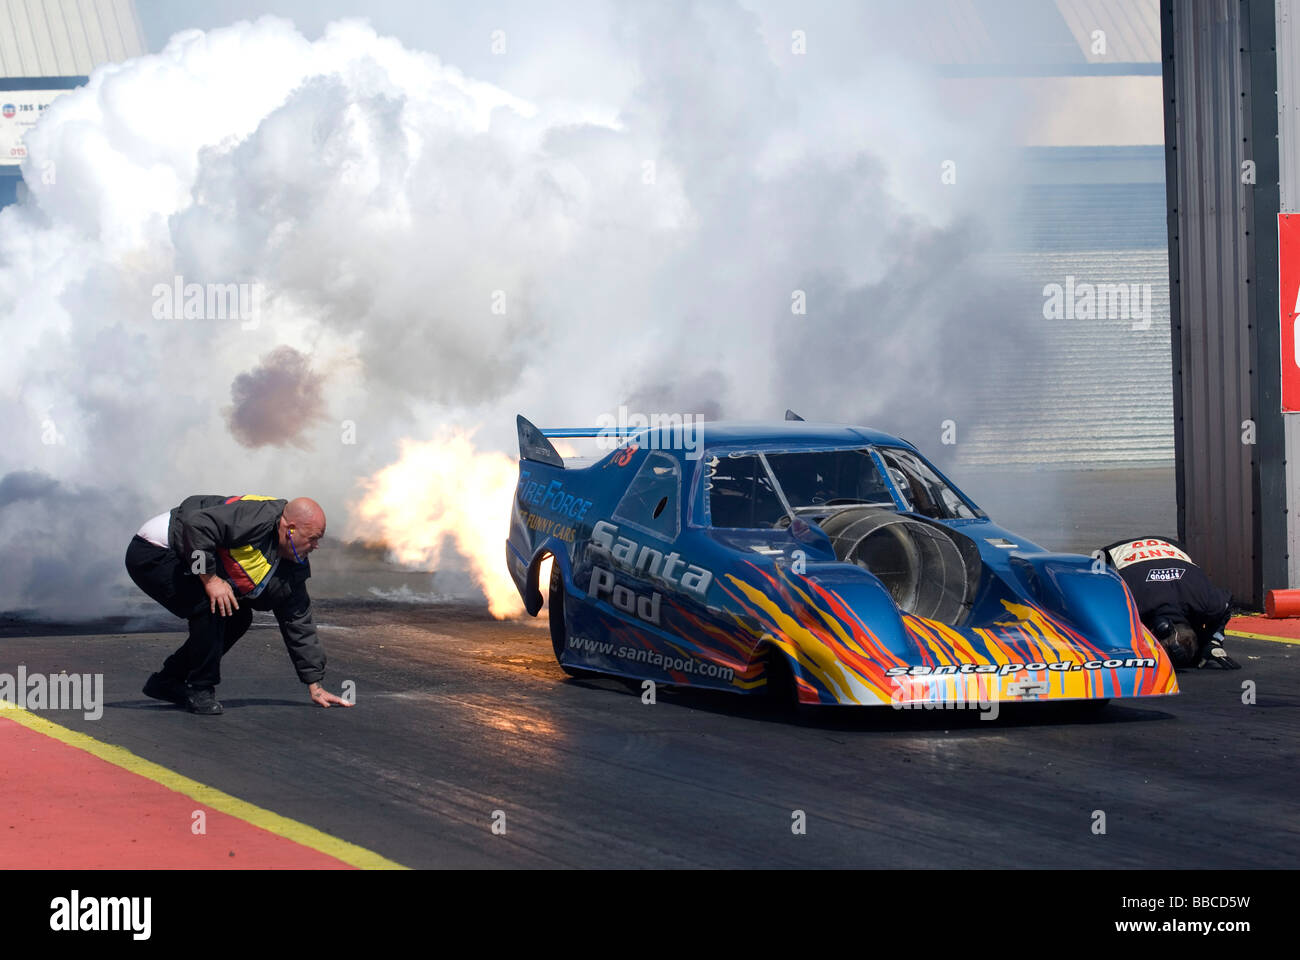 Martin Hill in Fireforce 3 Jet Funny car at The Main Event, FIA European Drag Racing at Santa Pod Raceway Stock Photo